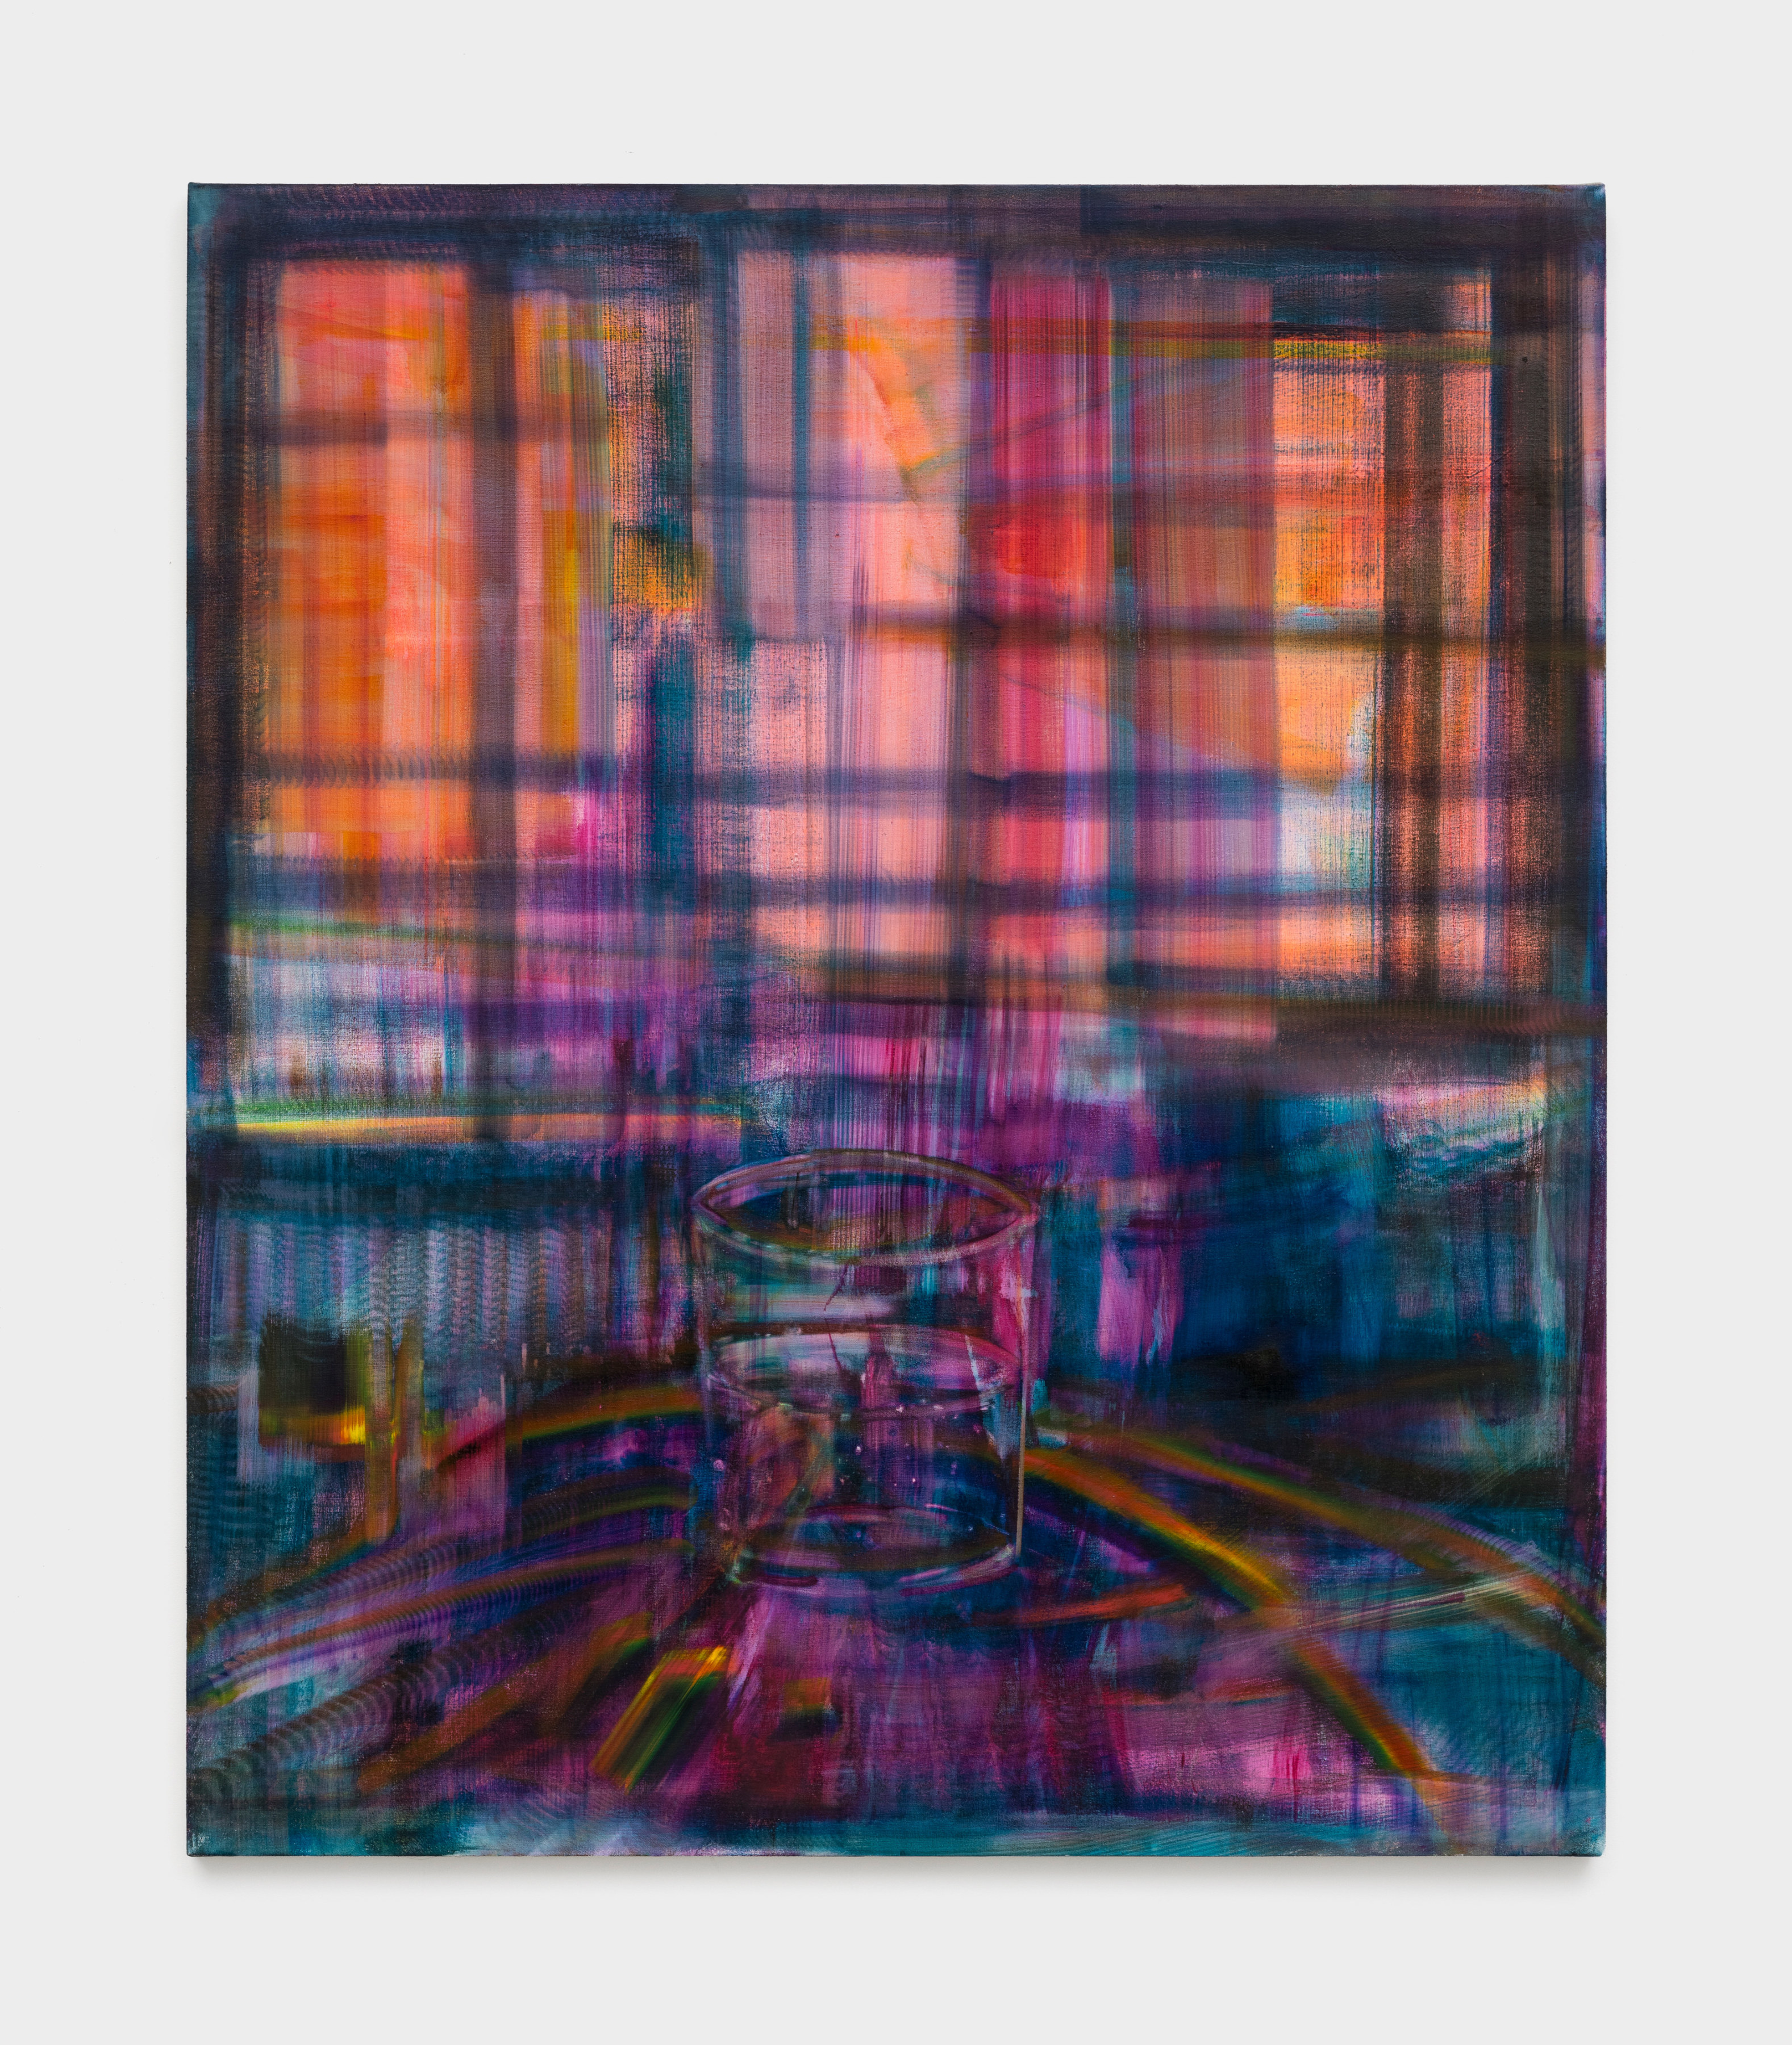 A painting with streaks of orange, pink, blue and purple pigment depicting a glass on a table. 